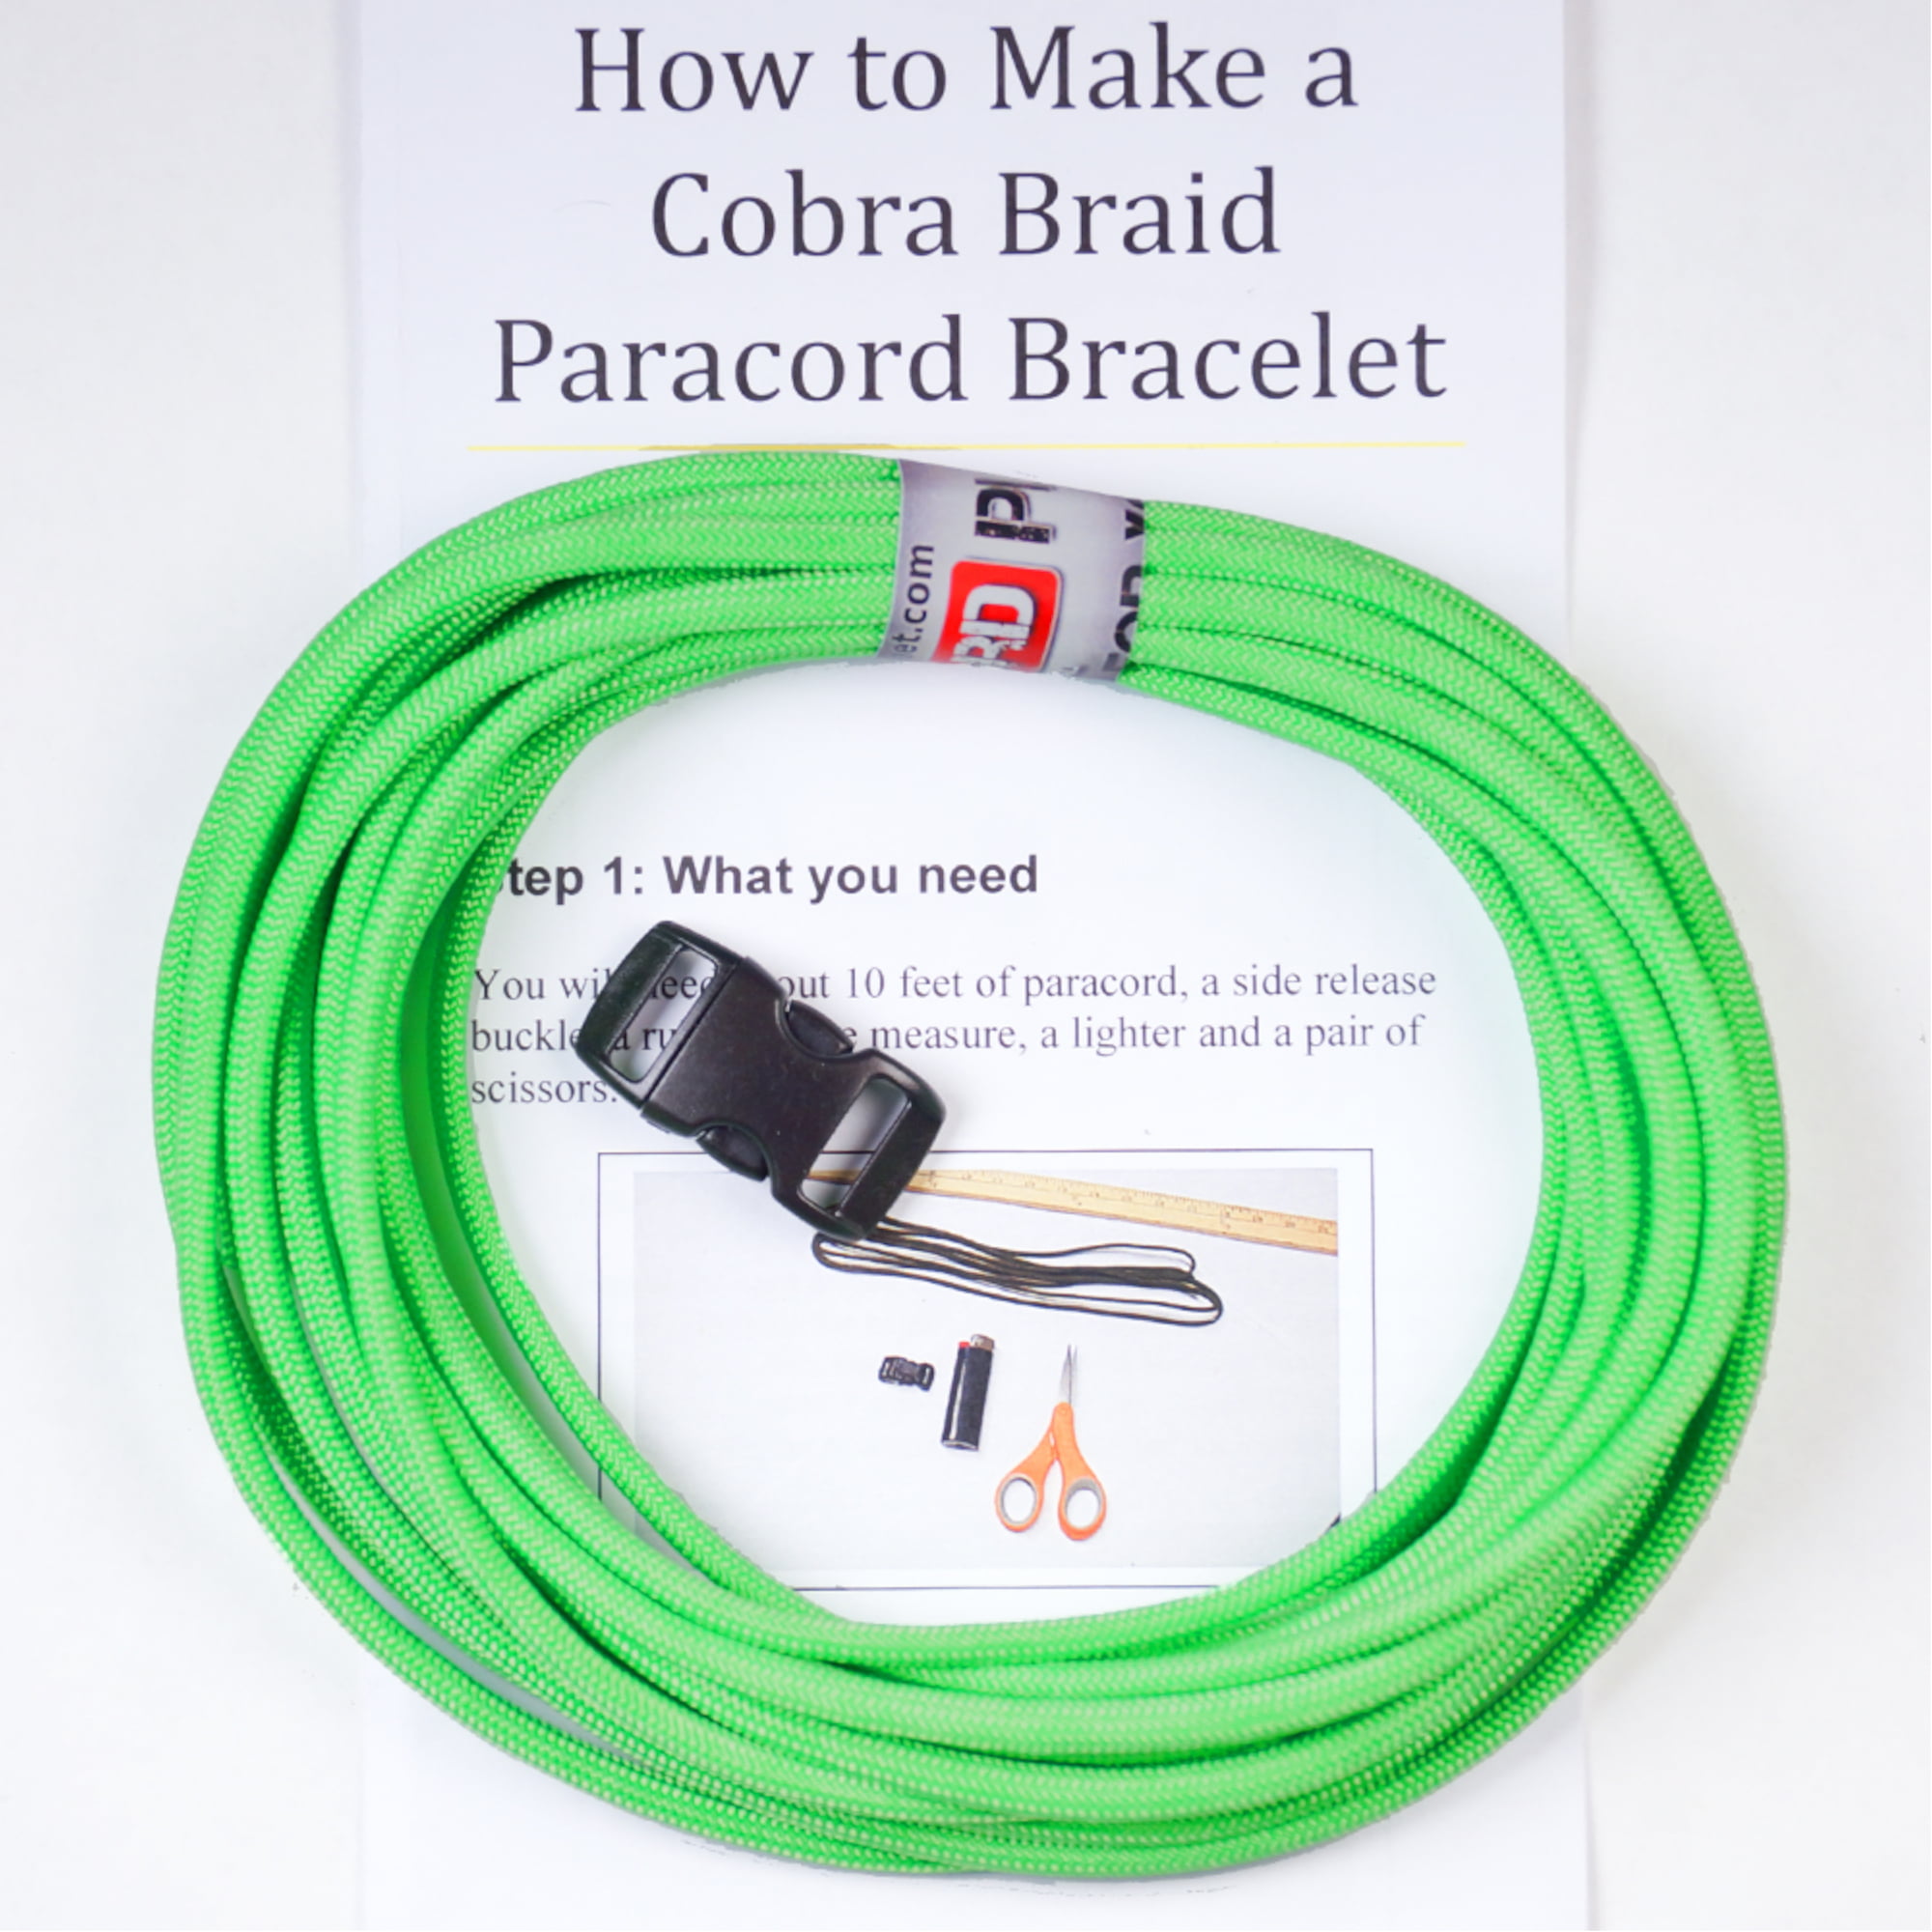 50 + Paracord Bracelets With Step by Step How To | Paracord bracelet  patterns, Paracord bracelets, Paracord bracelet tutorial